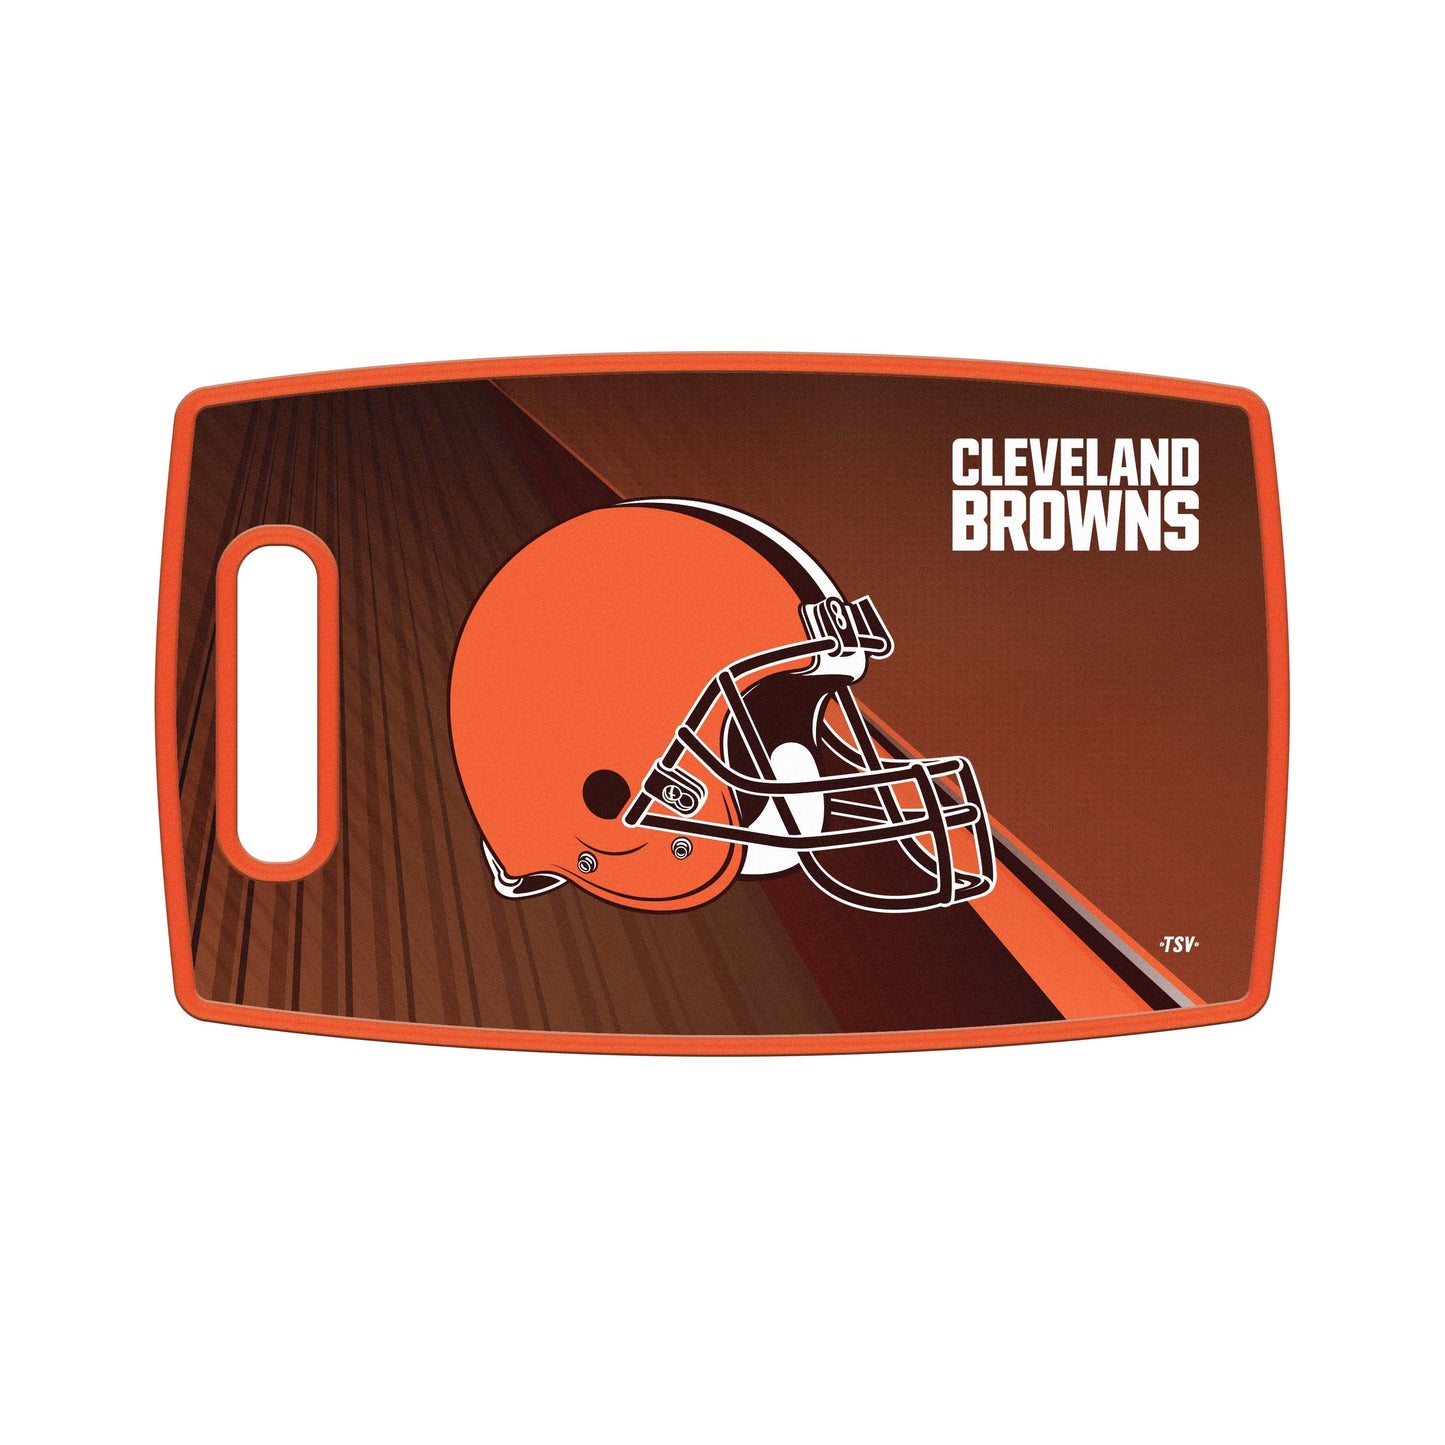 Cleveland Browns Large 9.5" x 14.5" Cutting Board by Sports Vault